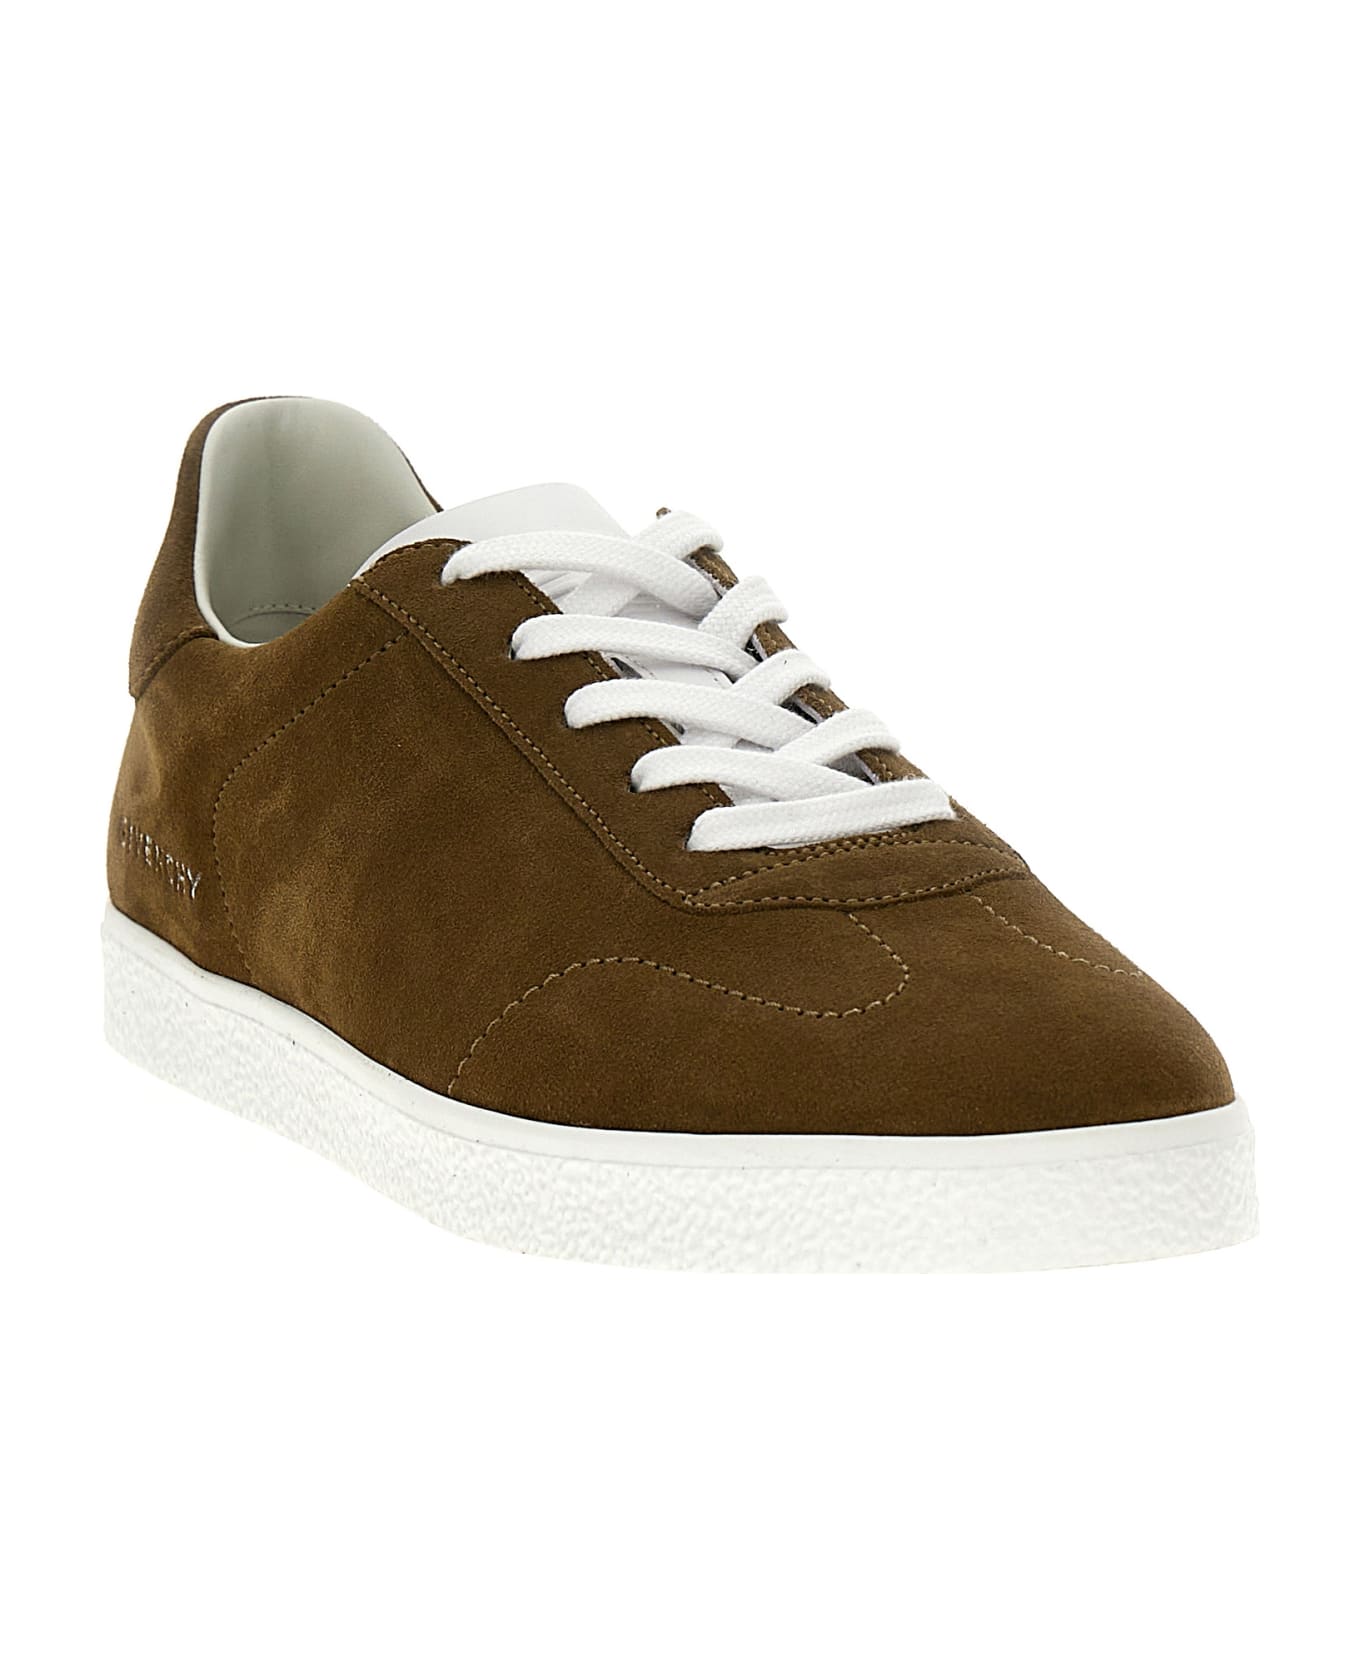 Givenchy 'town' Sneakers - Beige